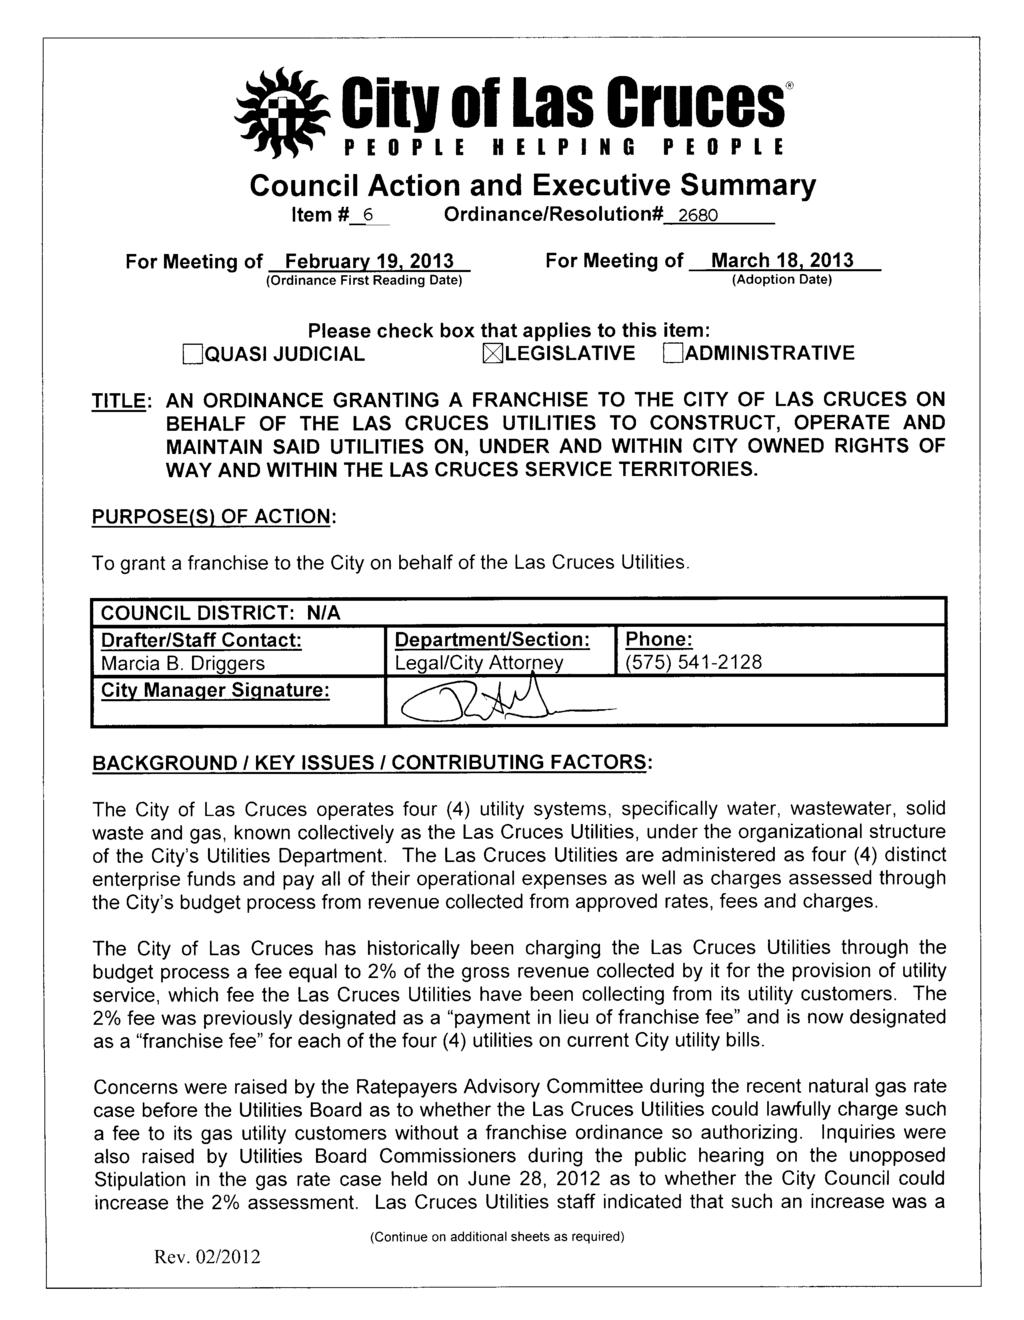 jocity of Las Cruces PEOPLE HELPING PEOPLE Council Action and Executive Summary Item # 6 Ordinance /Resolution# 2580 For Meeting of February 19, 2013 For Meeting of March 18, 2013 Ordinance First